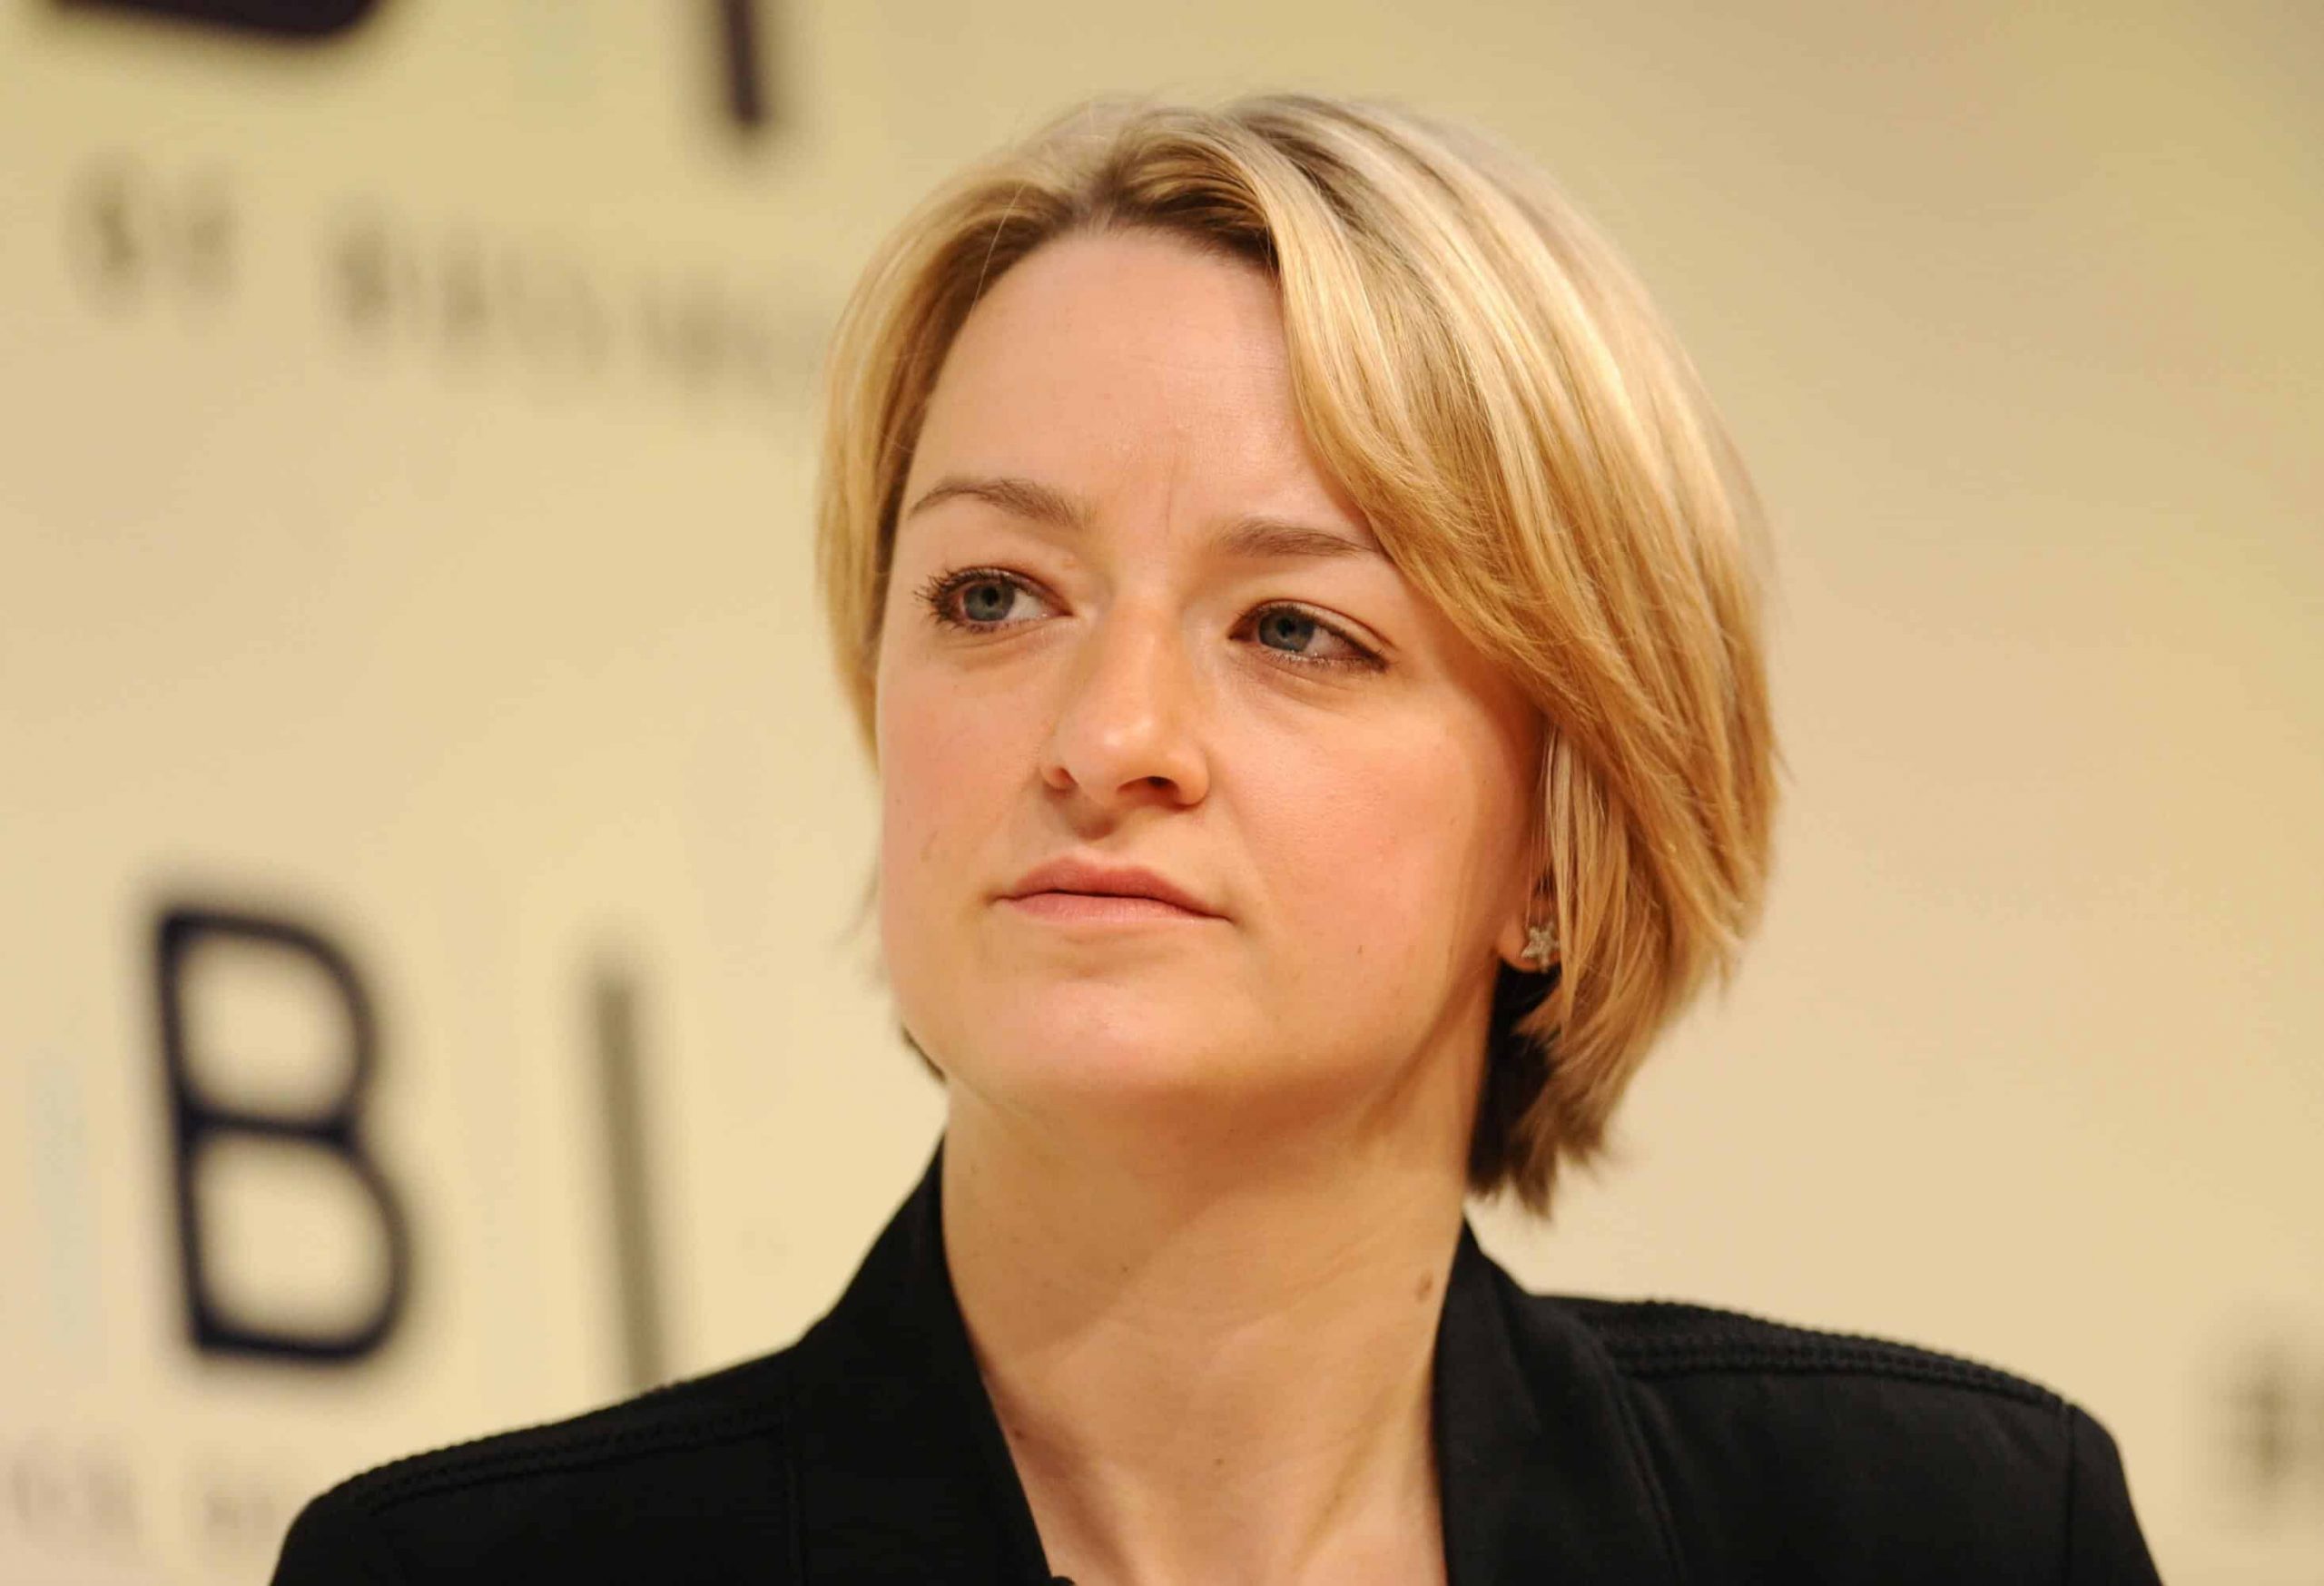 Laura Kuenssberg takes a swipe at Remainer MPs who tried to “undo Brexit”